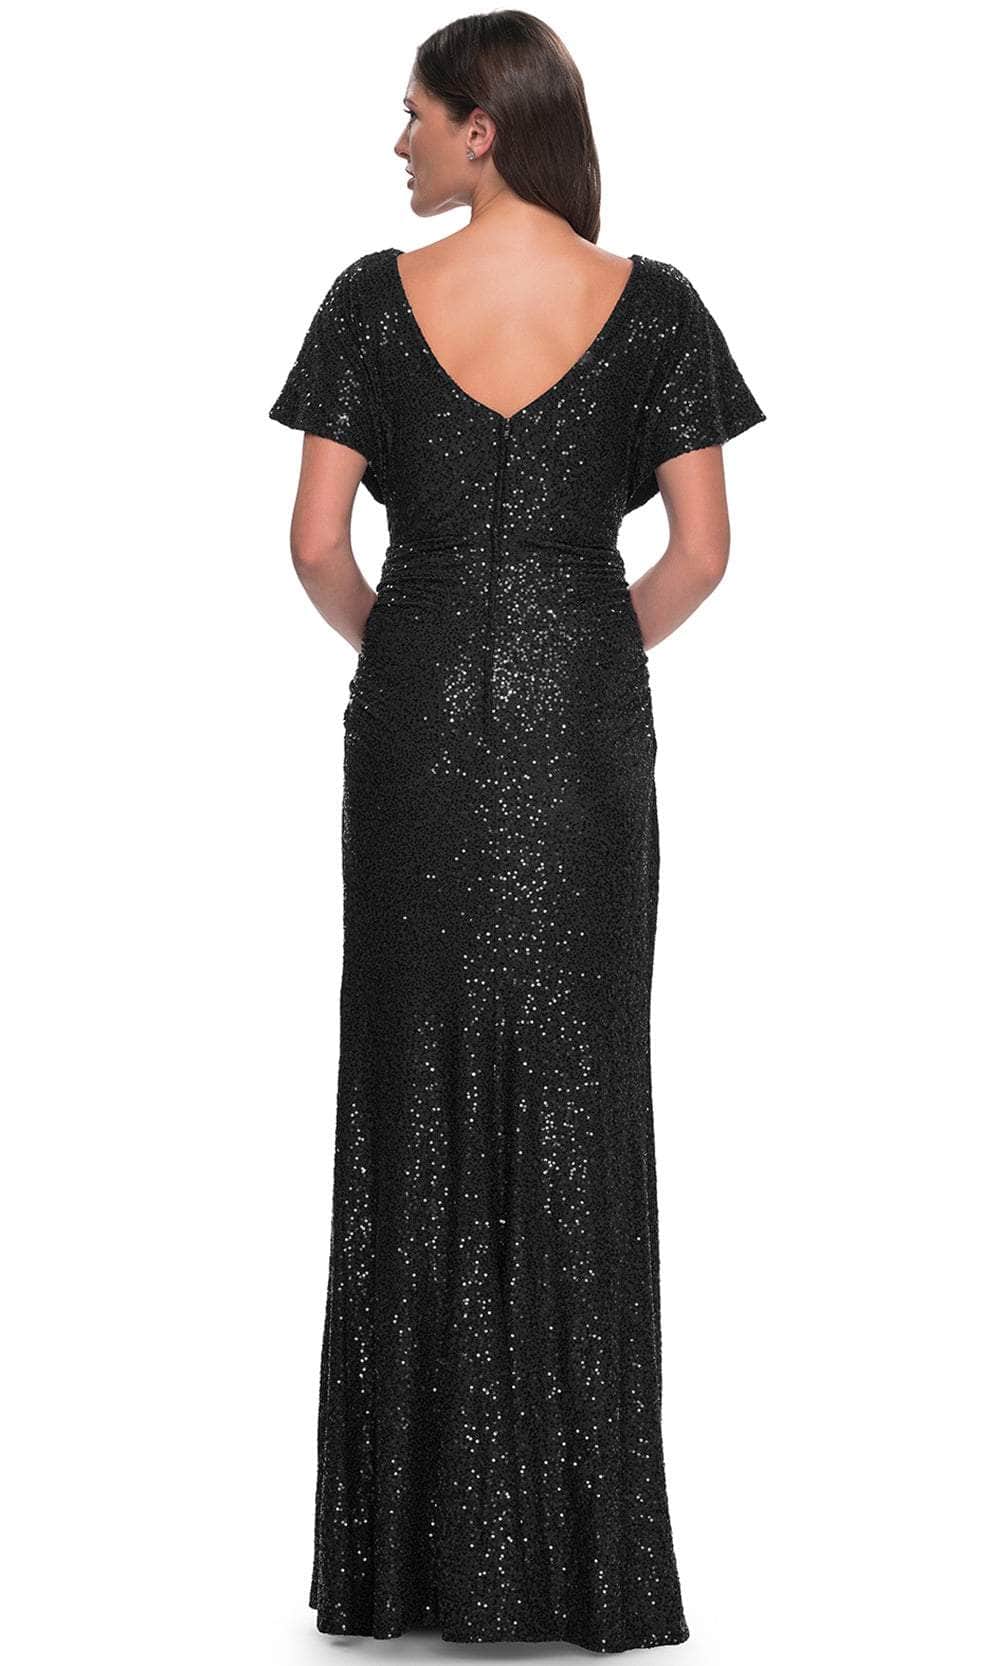 La Femme 30885 - Sequin Evening Dress with Dolman Sleeves Mother of the Bride Dresses